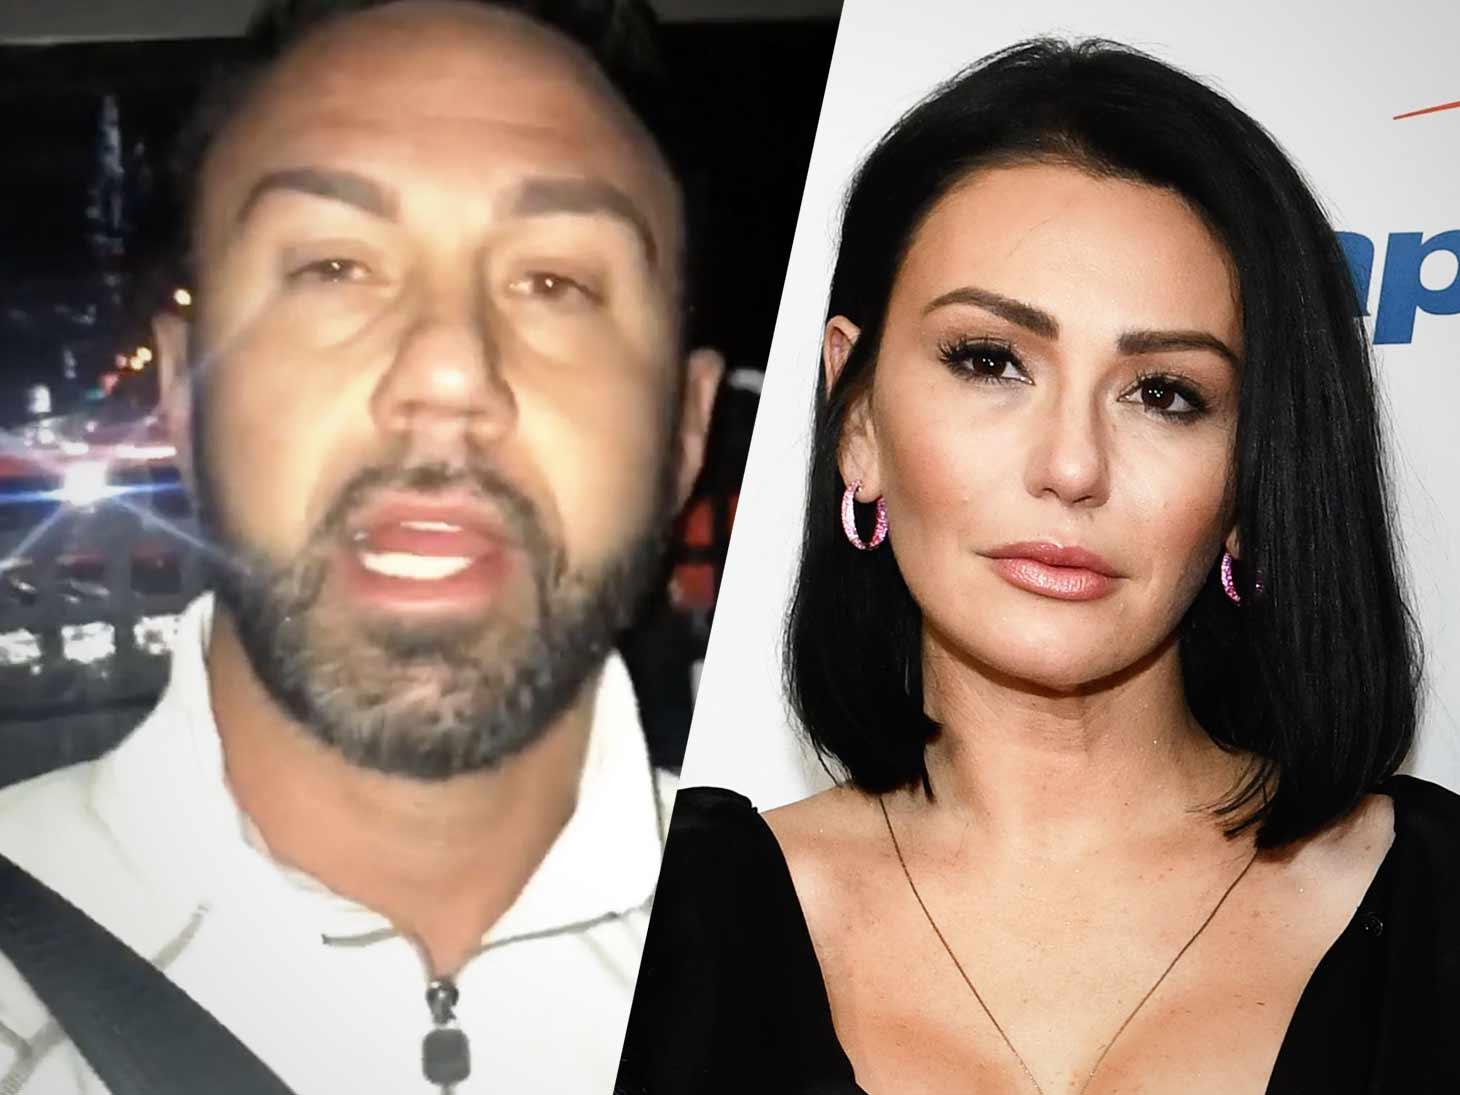 Police Rush to JWoww’s Home During Fight With Estranged Husband, She Gets Restraining Order